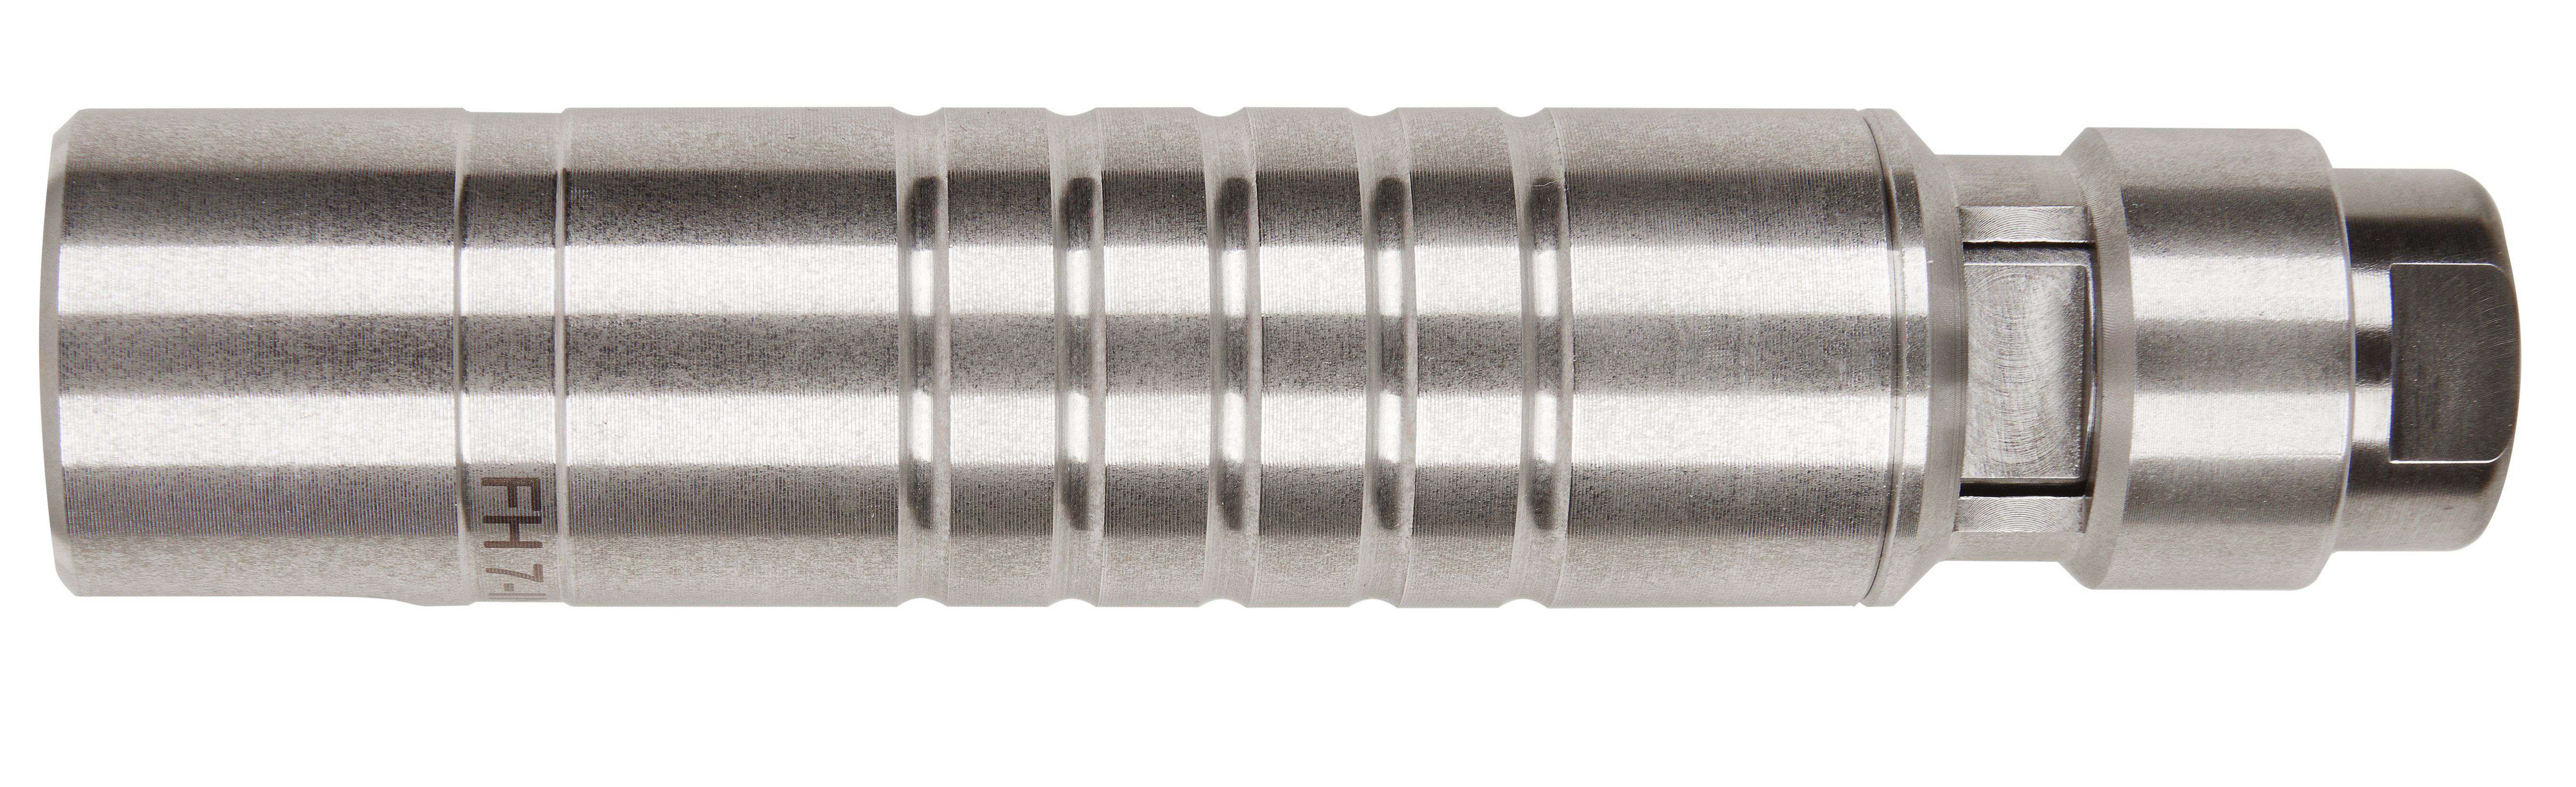 Suhner FH 7 Straight Toolholder, Inox / Stainless Steel, G 22 Connection, 1.06" Width, 5